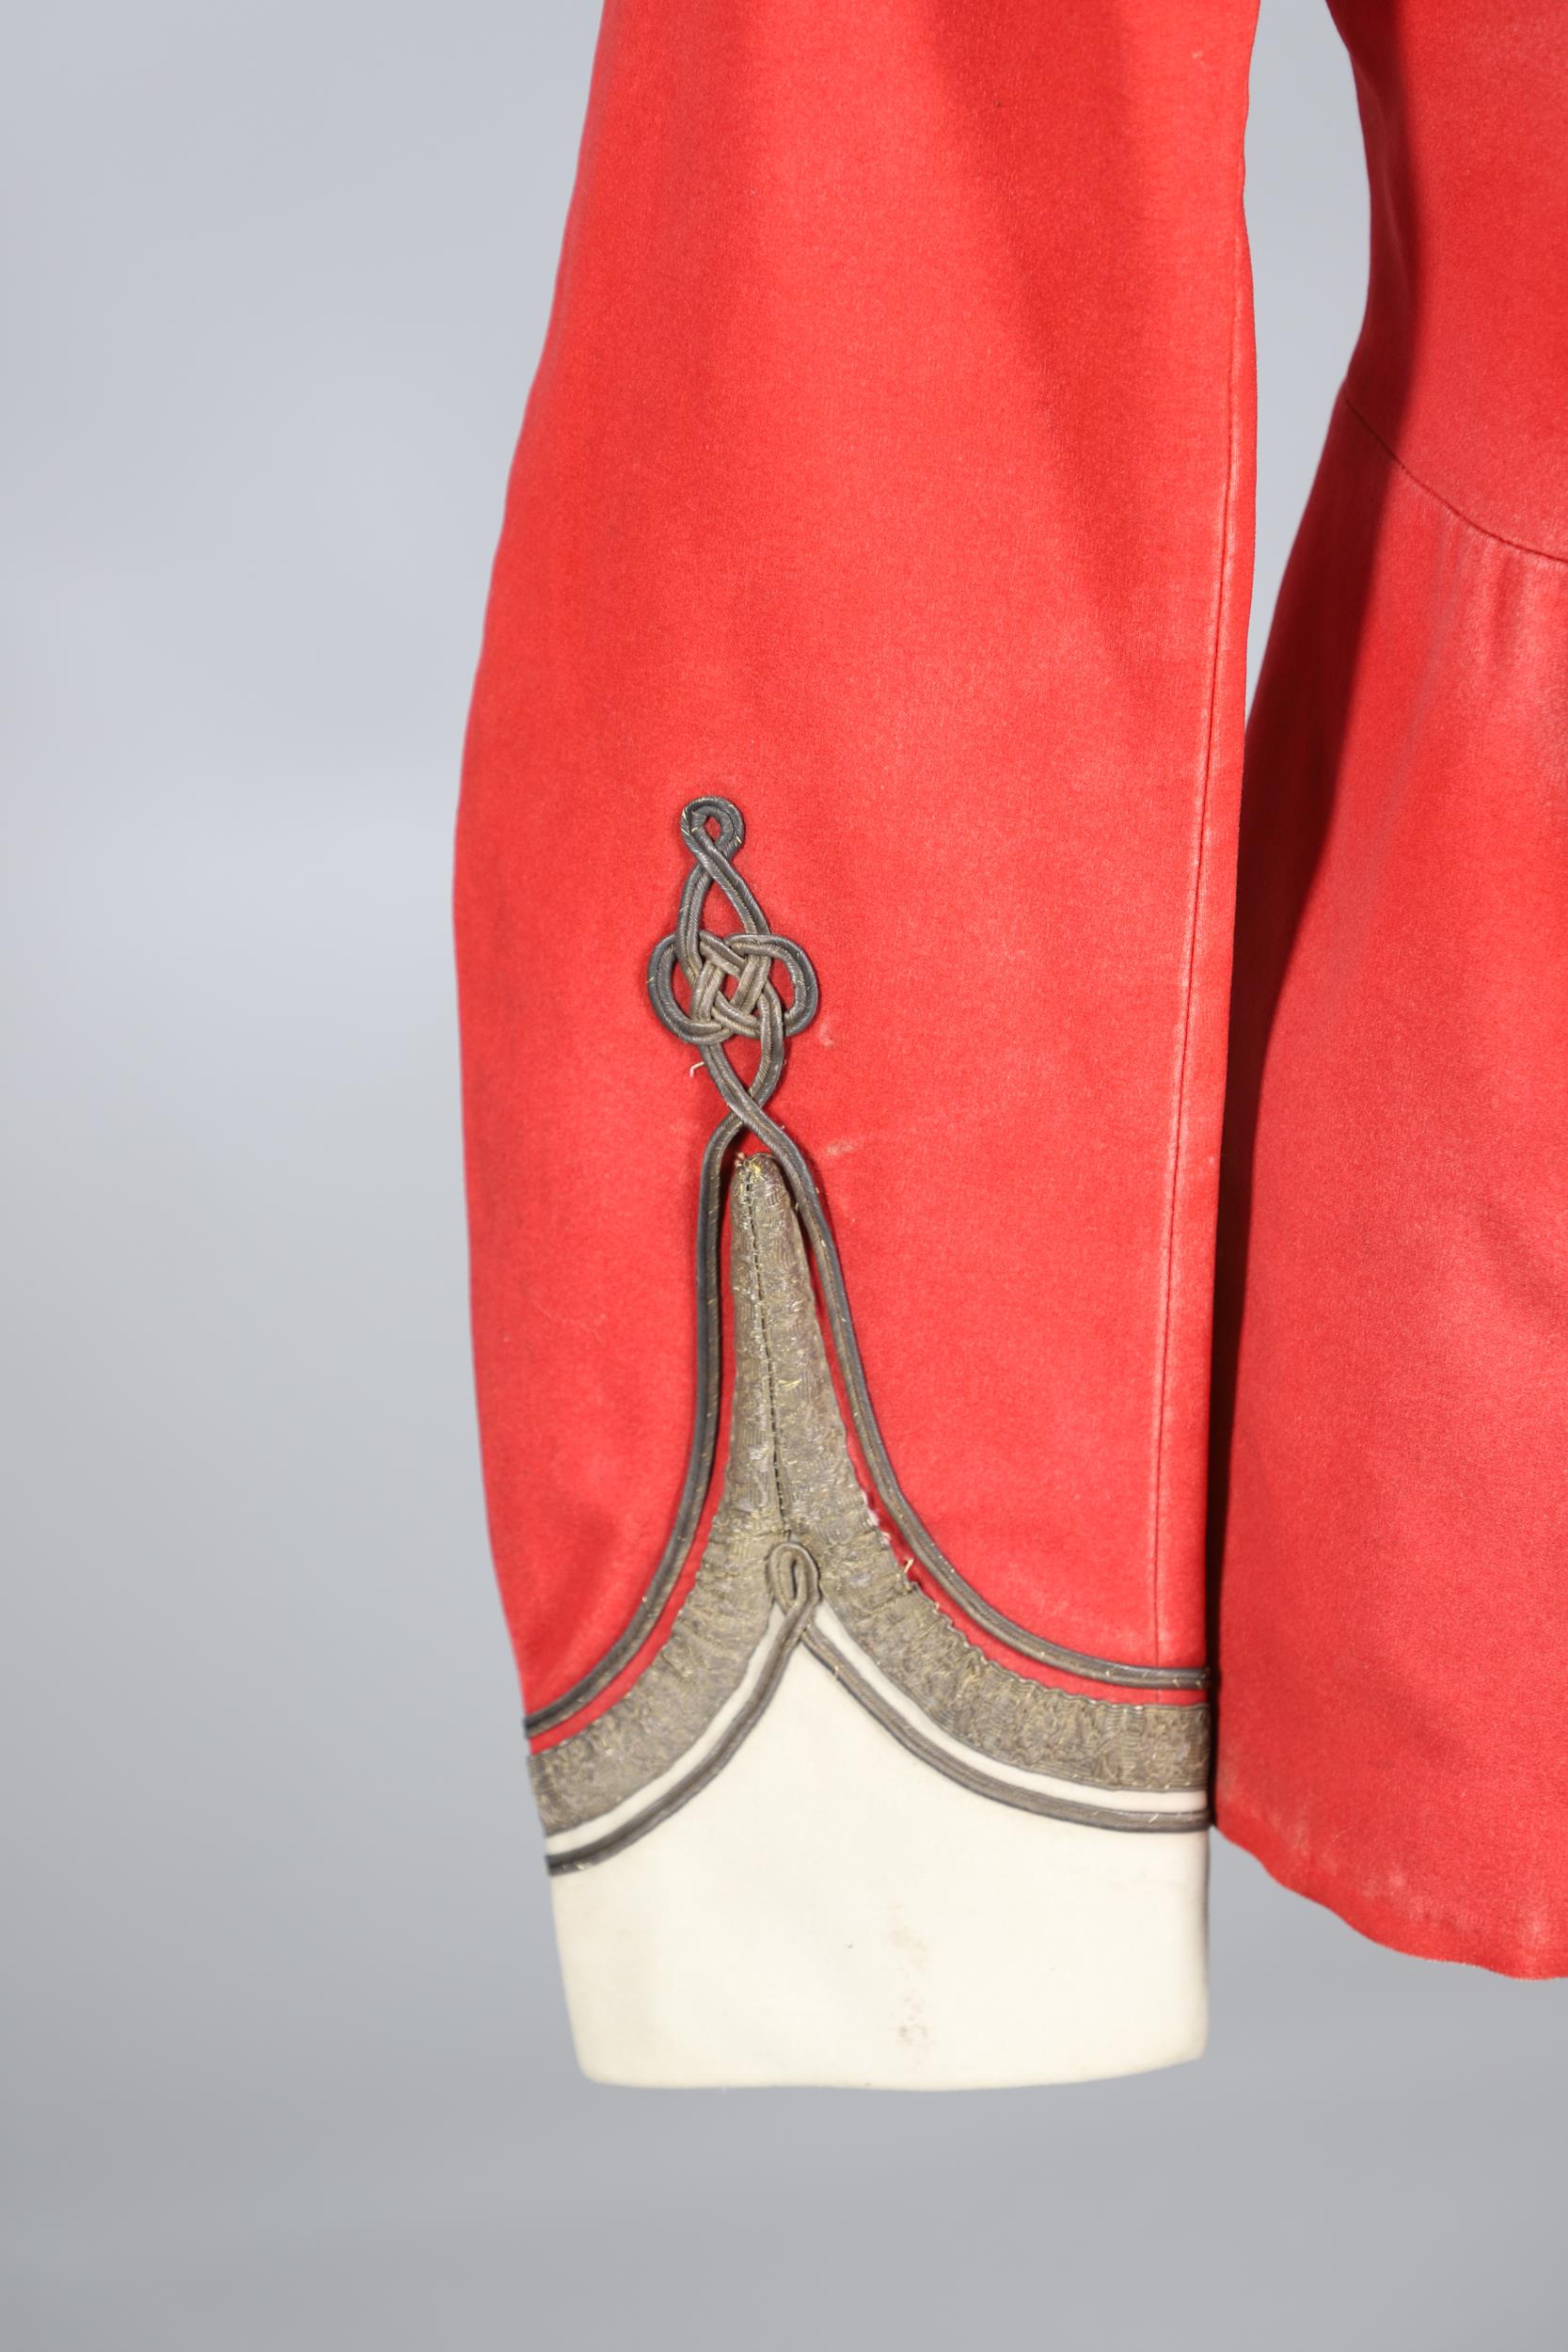 AN EARLY 20TH CENTURY SCARLET TUNIC FOR THE WORCESTER REGIMENT. - Image 4 of 16